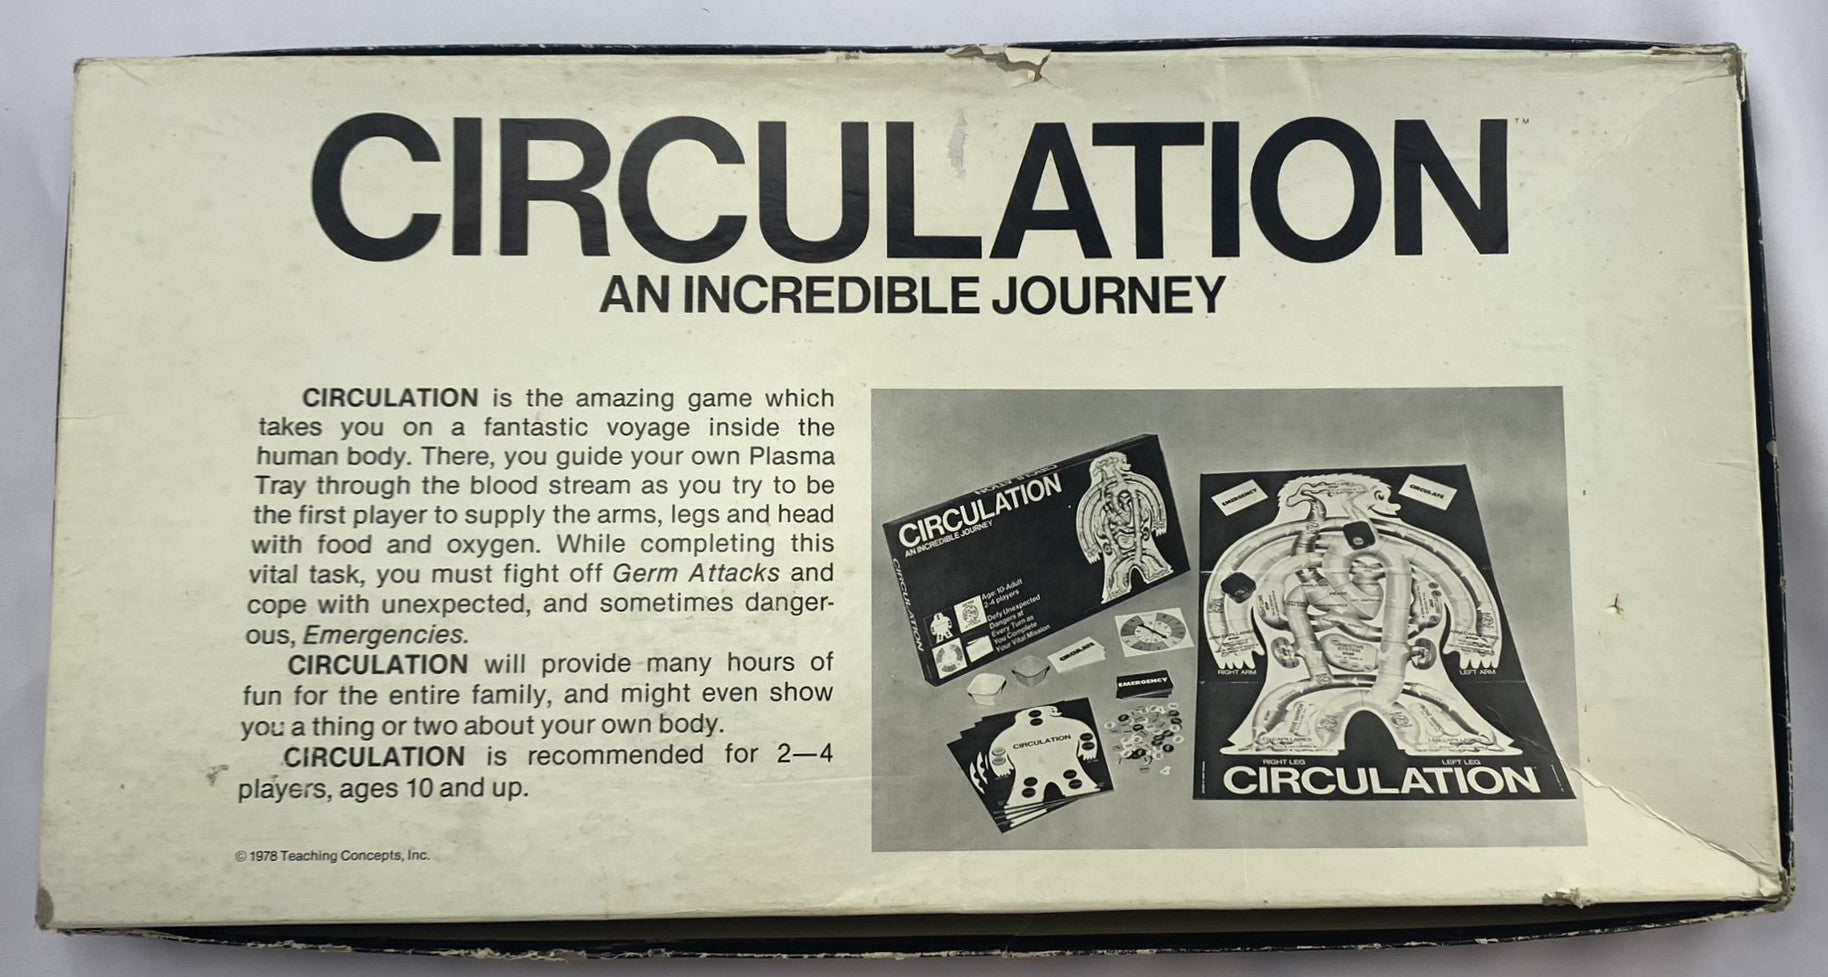 circulation-an-incredible-journey-game-1974-teaching-concepts-g